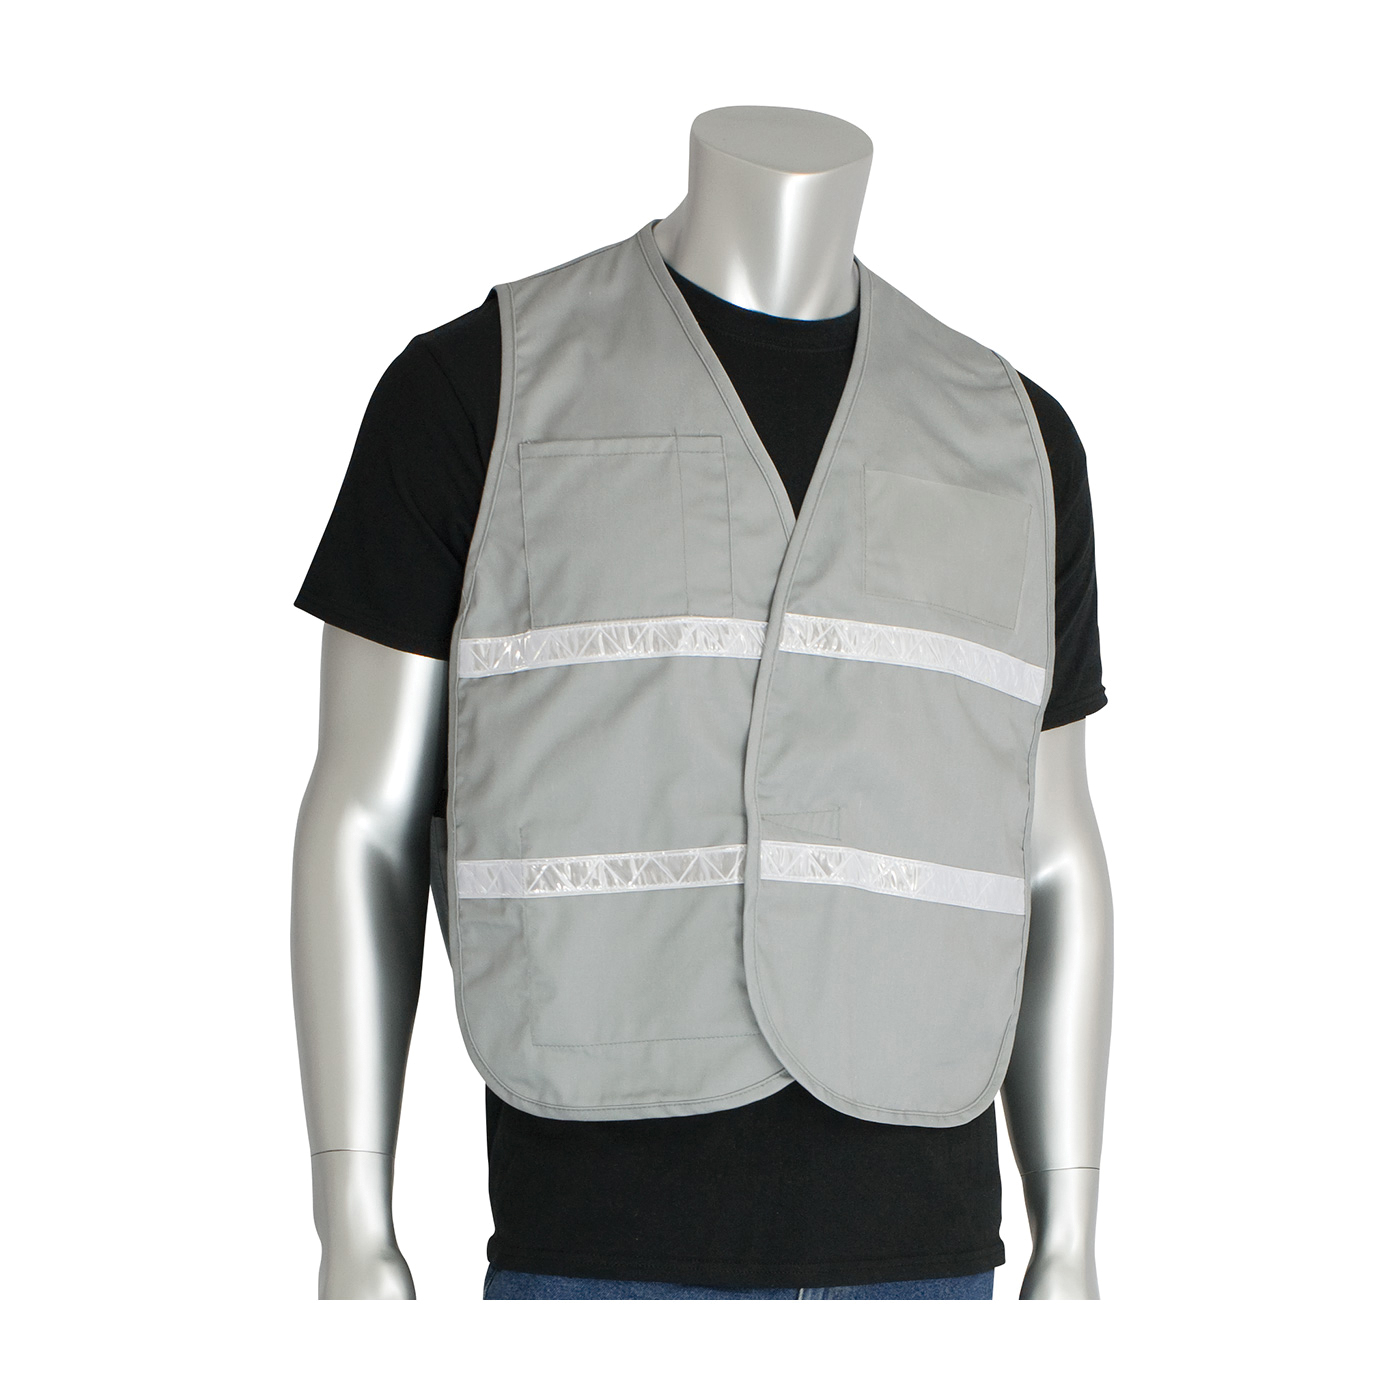 PIP® 300-2515/2X-3X 300-2500 Non-ANSI Incident Command Vest, 2XL/3XL, Gray, 35% Cotton/65% Polyester, Hook and Loop Closure, 4 Pockets